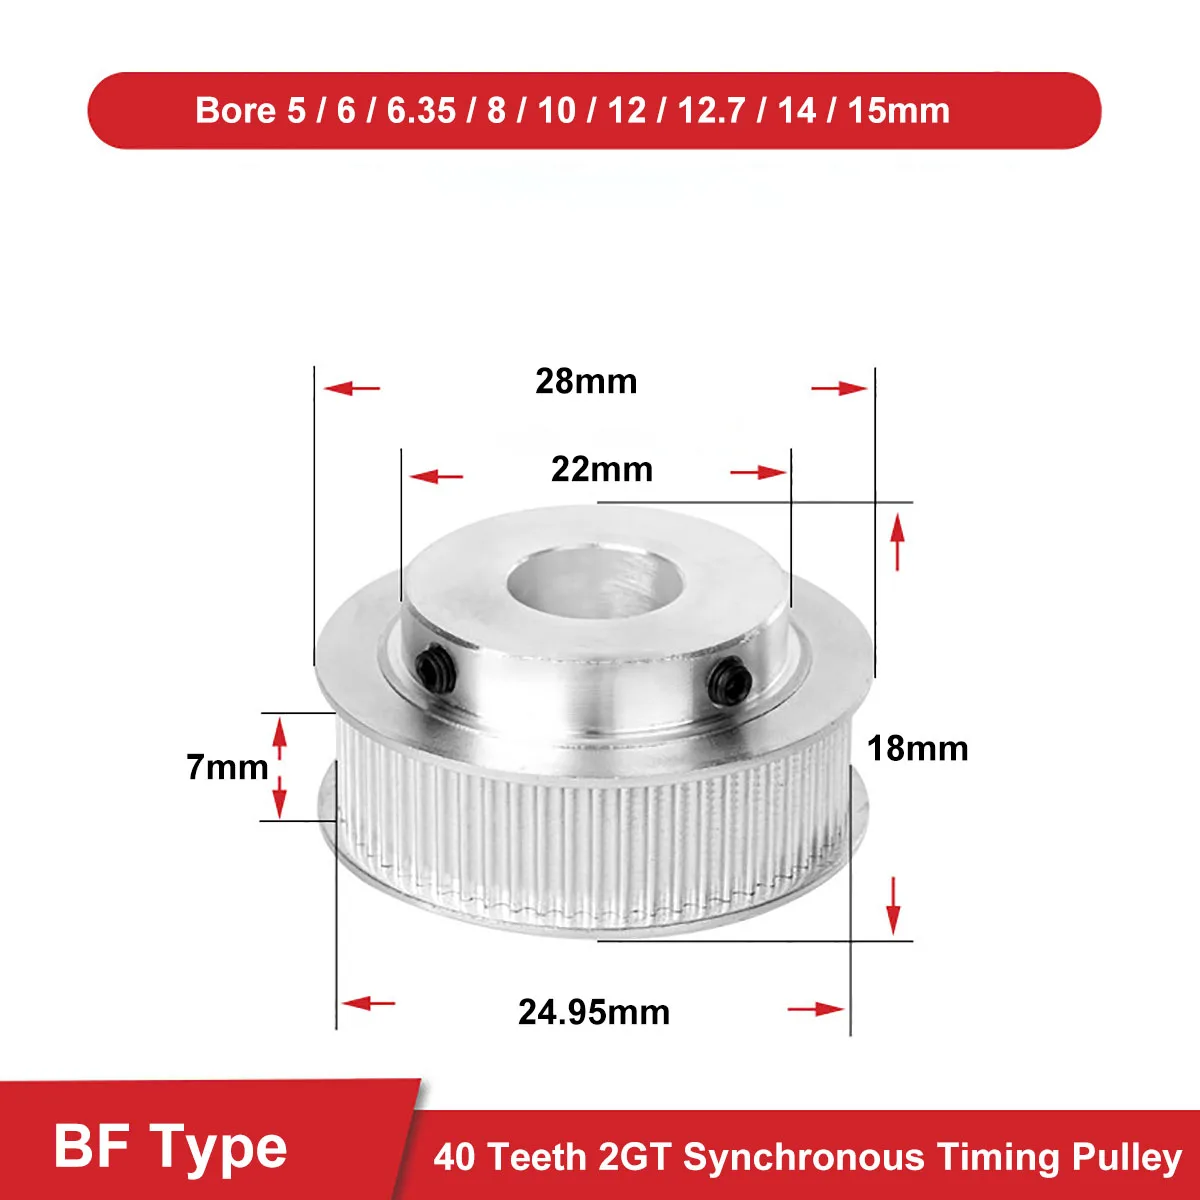 

BF 40Teeth 2GT Synchronous Timing Pulley Bore 5/6/6.35/8/10/12/12.7/14/15mm Aluminium Idler Pulley For 6mm Width 2GT Timing Belt